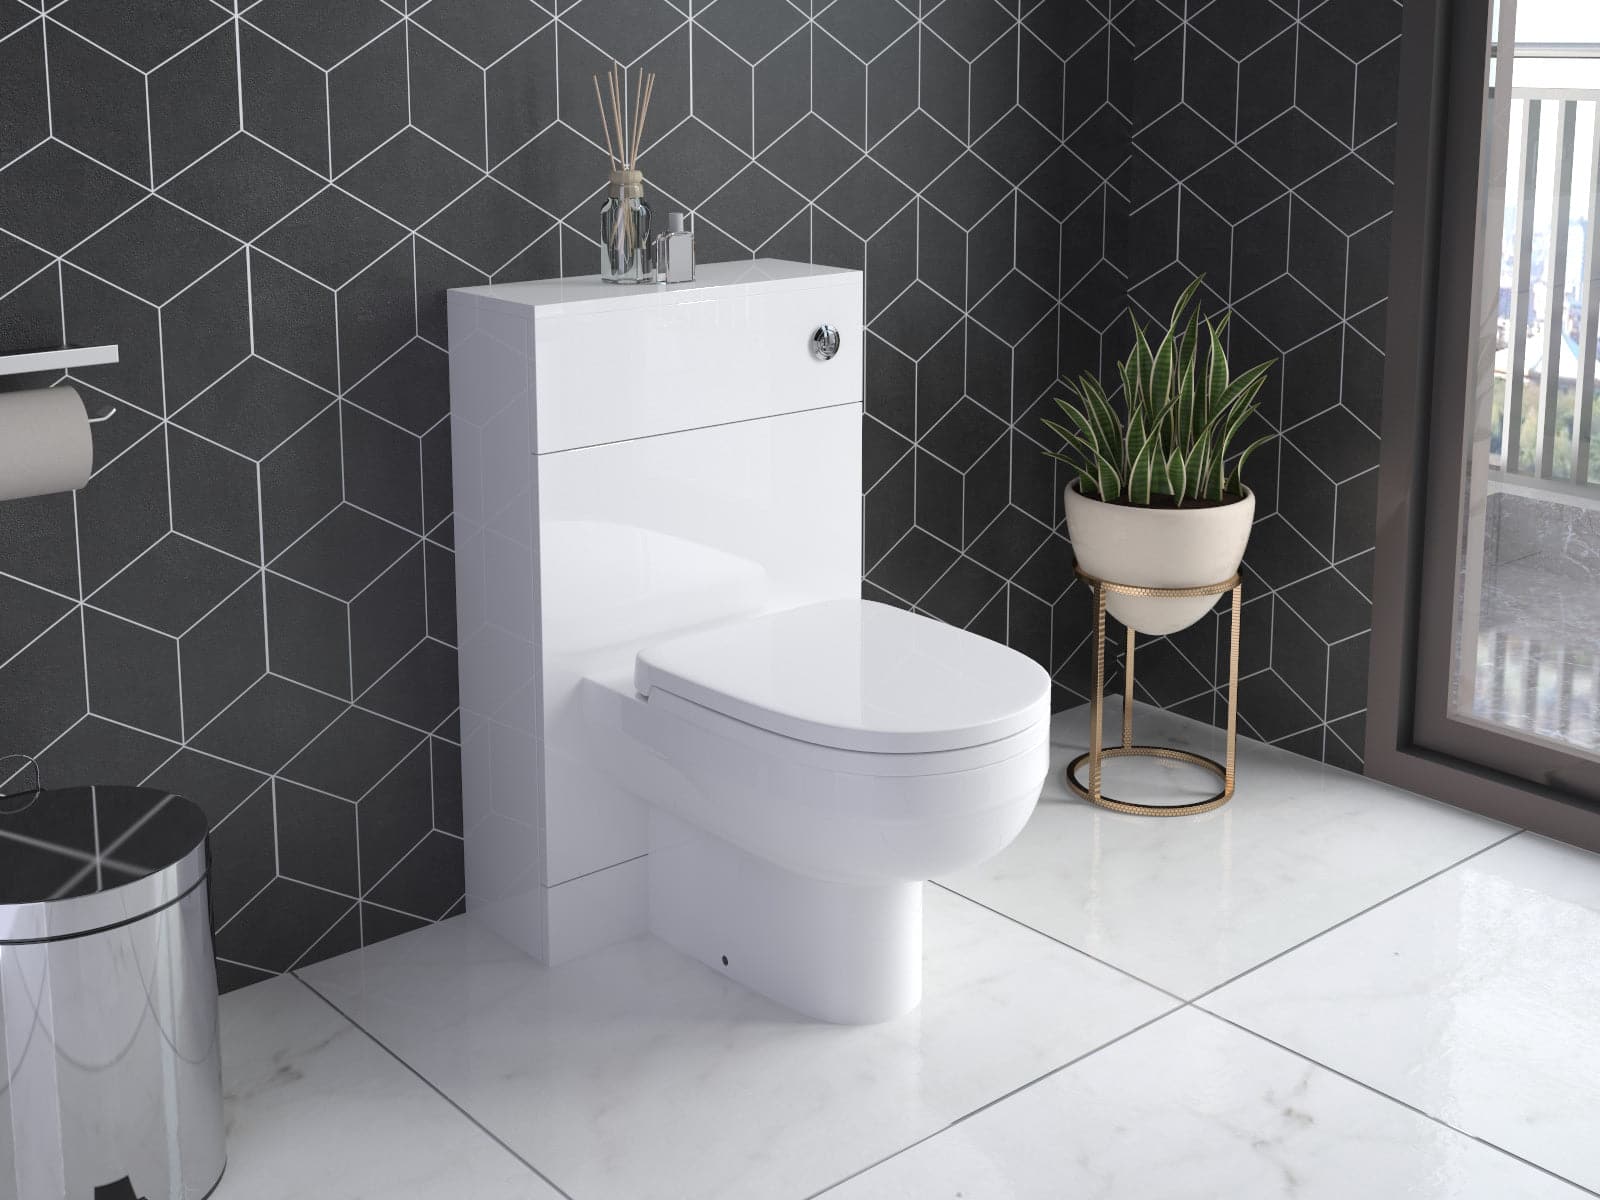 Modern White Close Coupled Toilet with Soft Close Seat Bathroom WC (SLK630) - Sleek design, water-efficient, ideal for UK bathrooms.